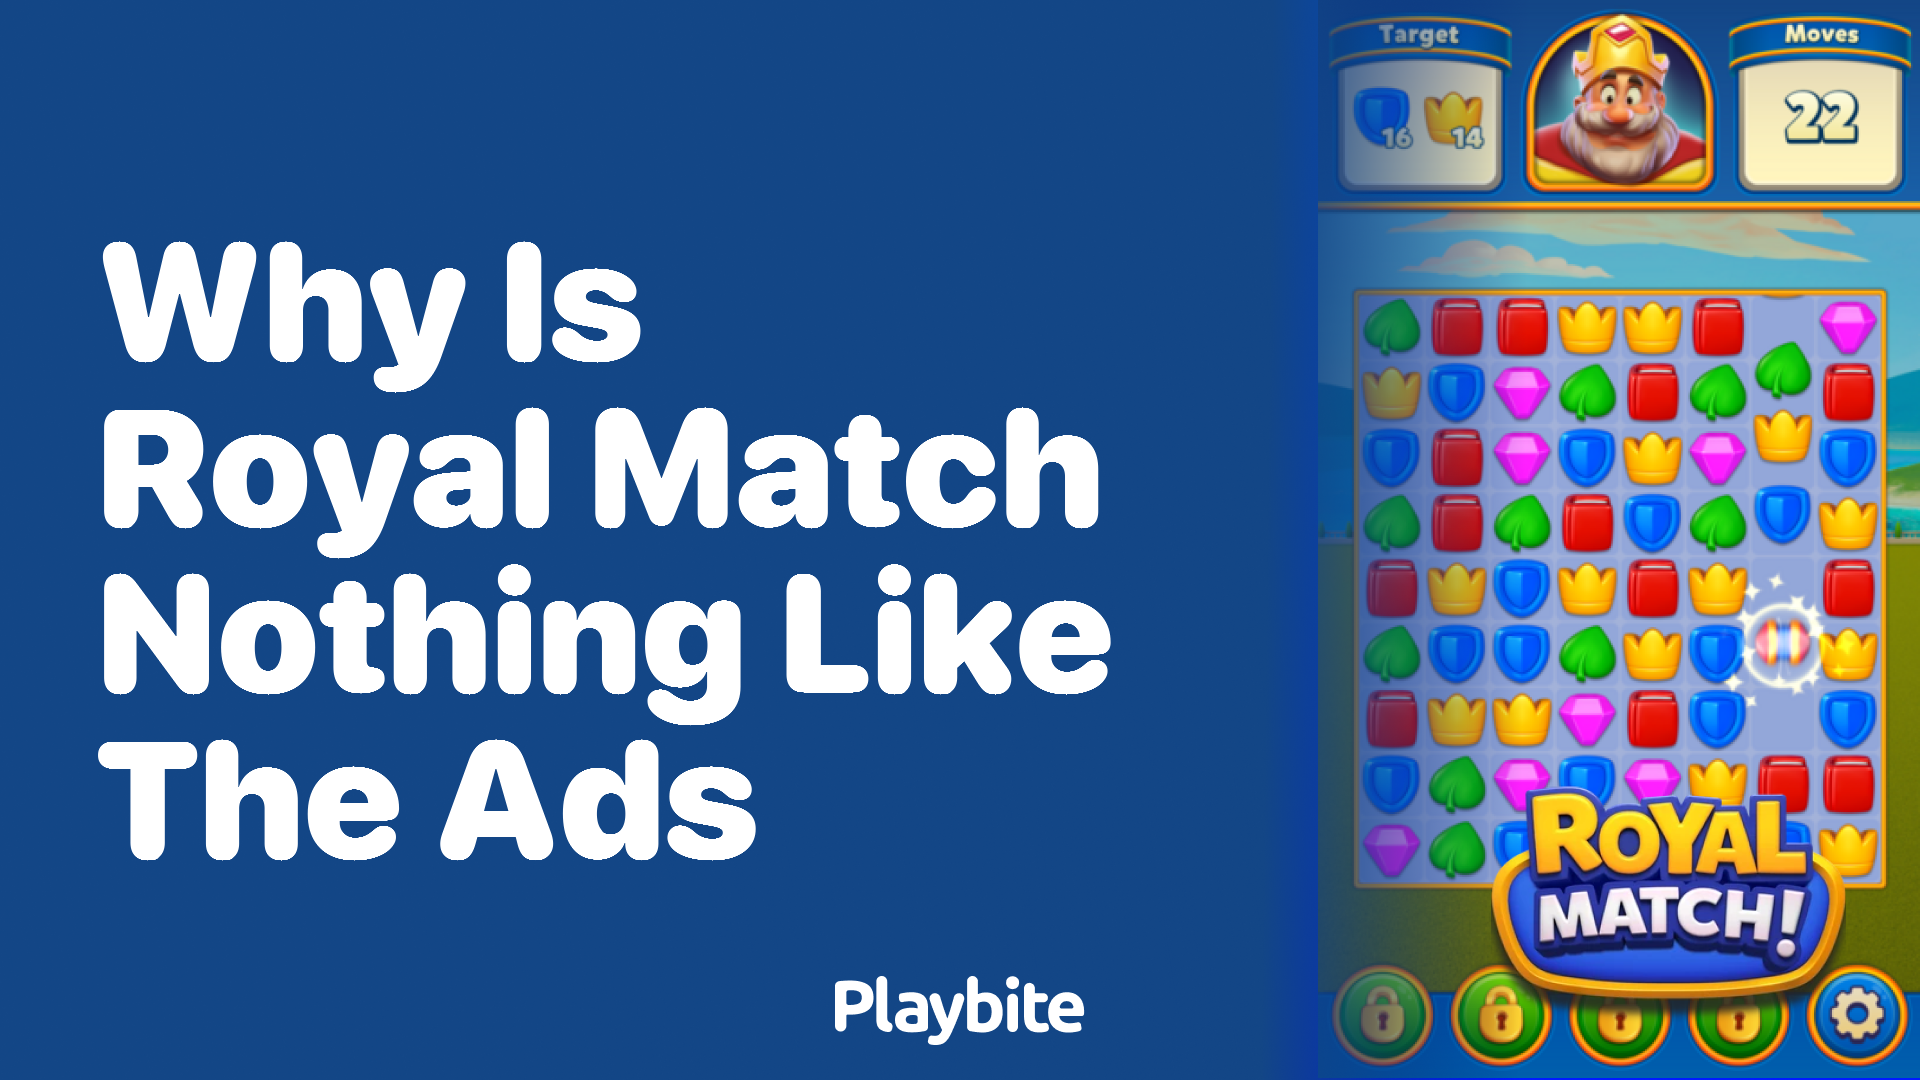 Why Is Royal Match Nothing Like the Ads?